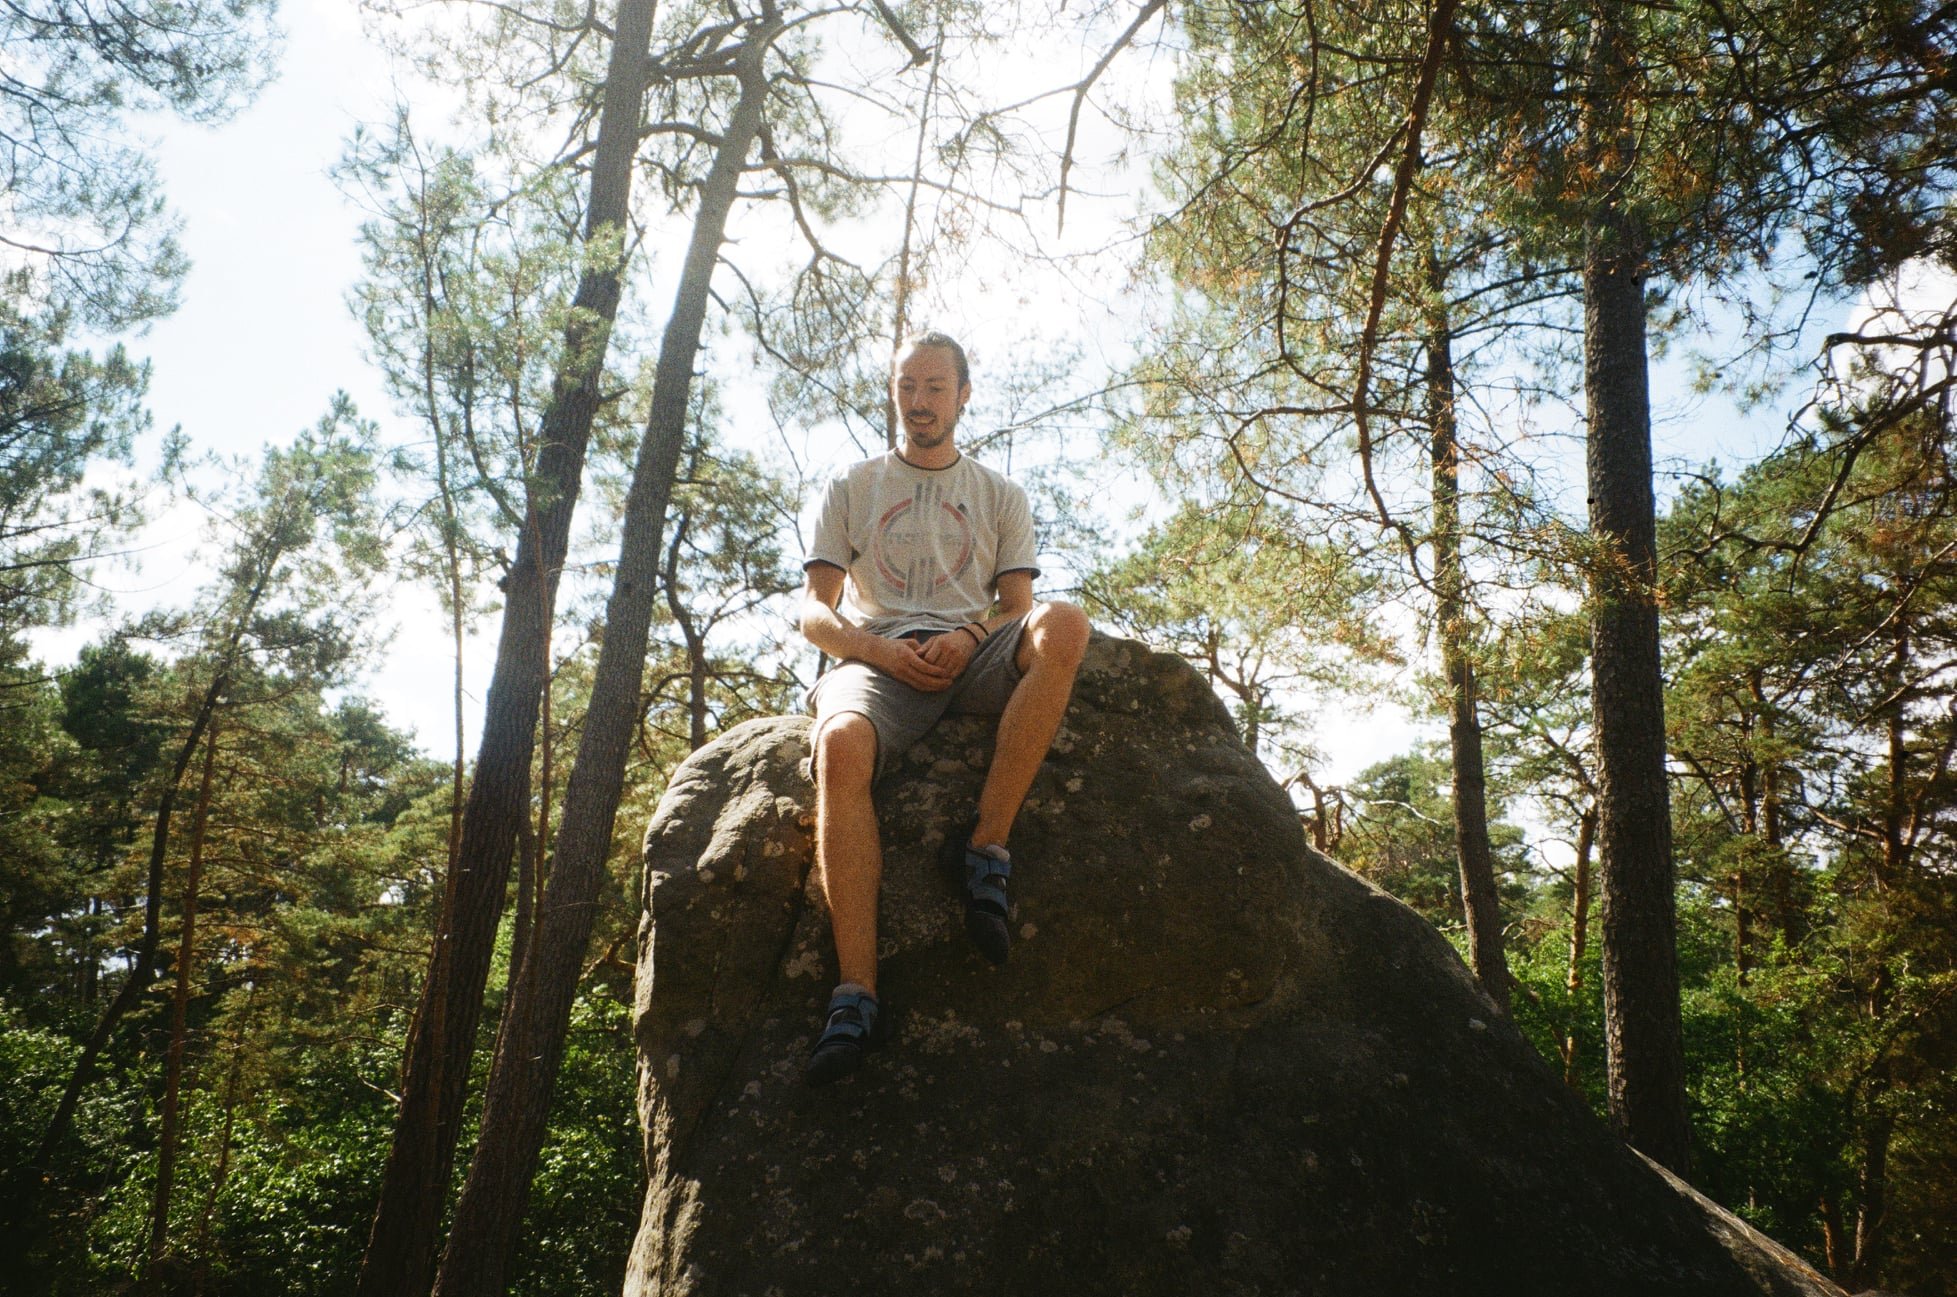 Me, happy after my first climb at Fontainebleau